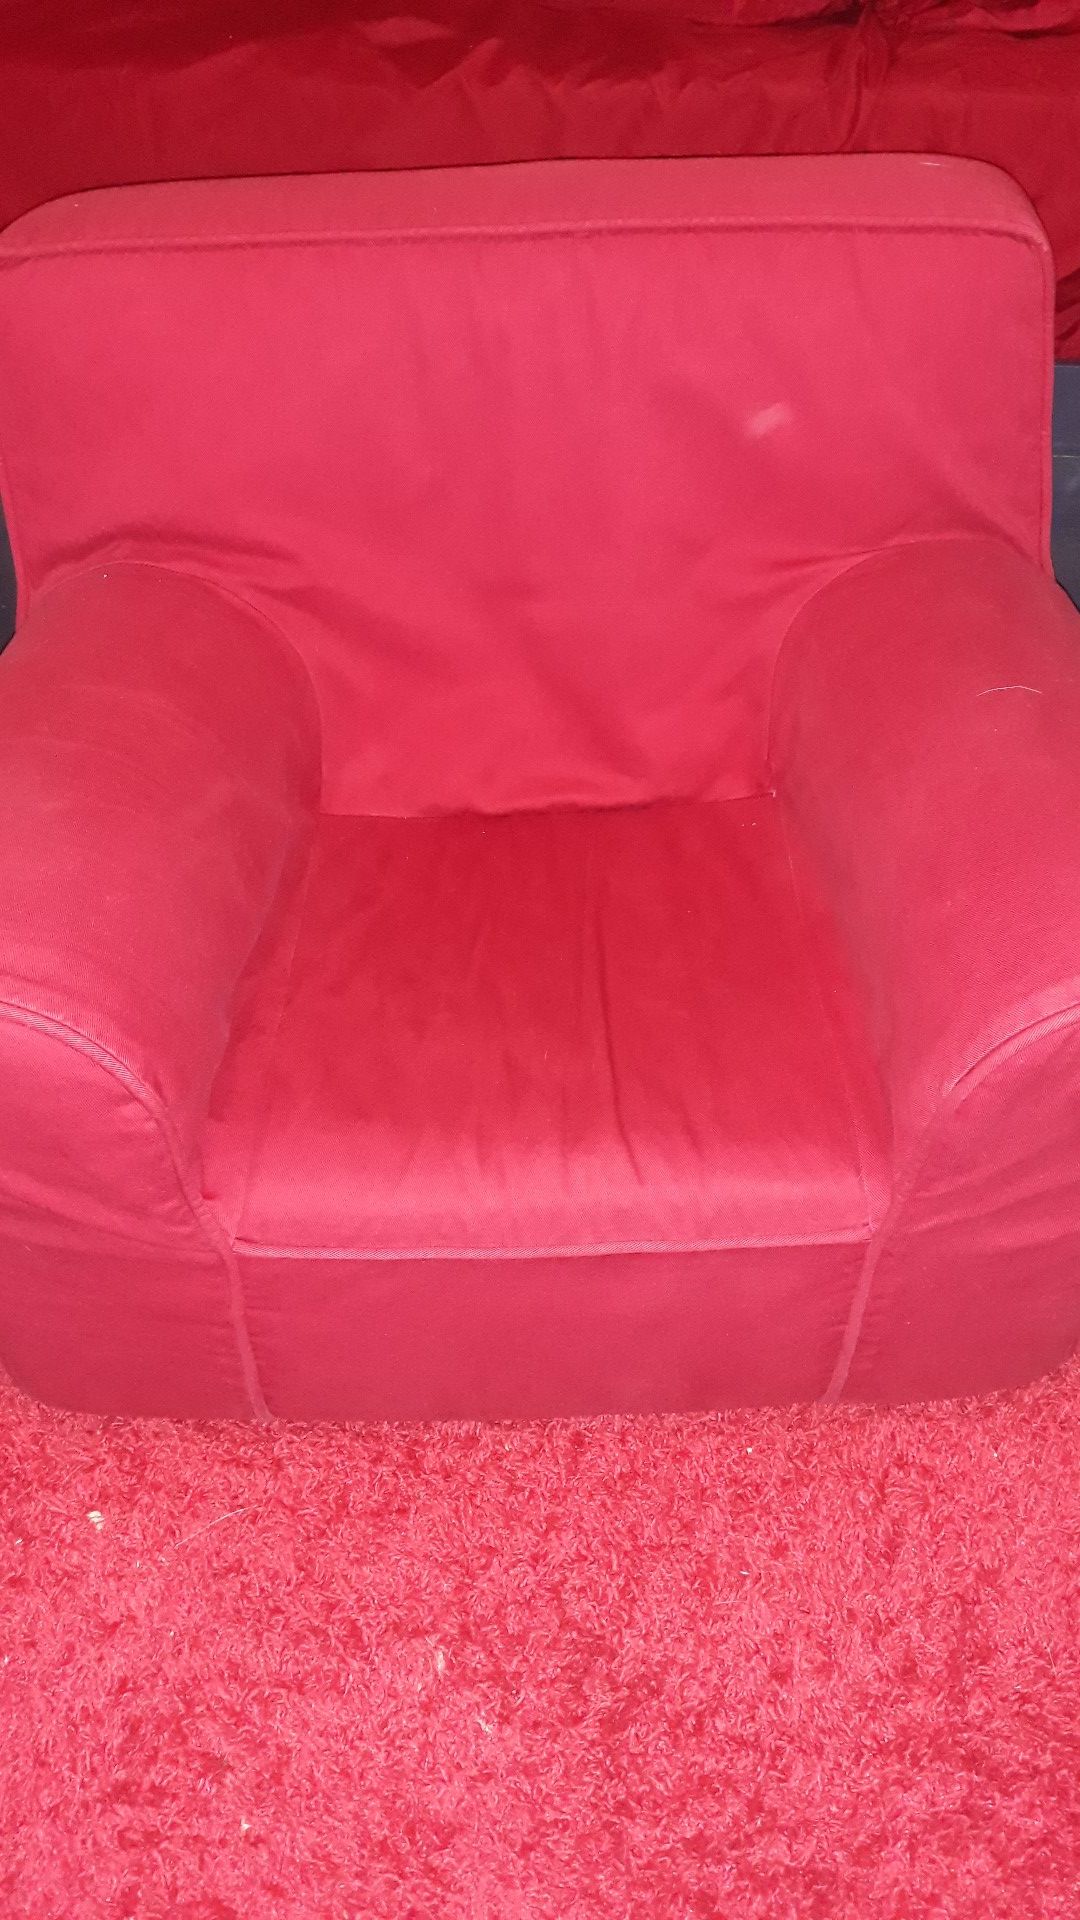 Kids red chair